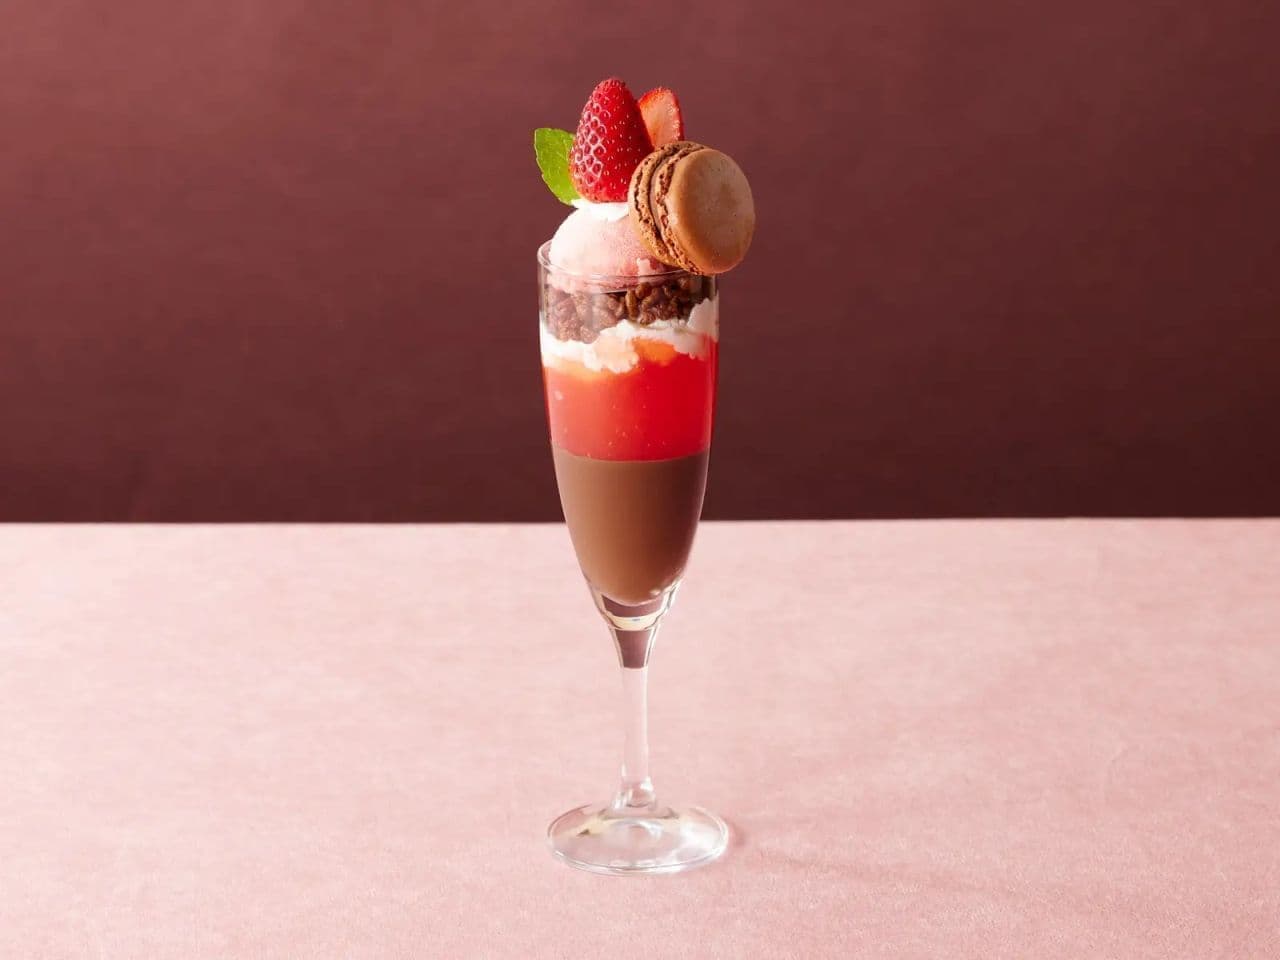 Cocos "Strawberry and Chocolate Glass Parfait"